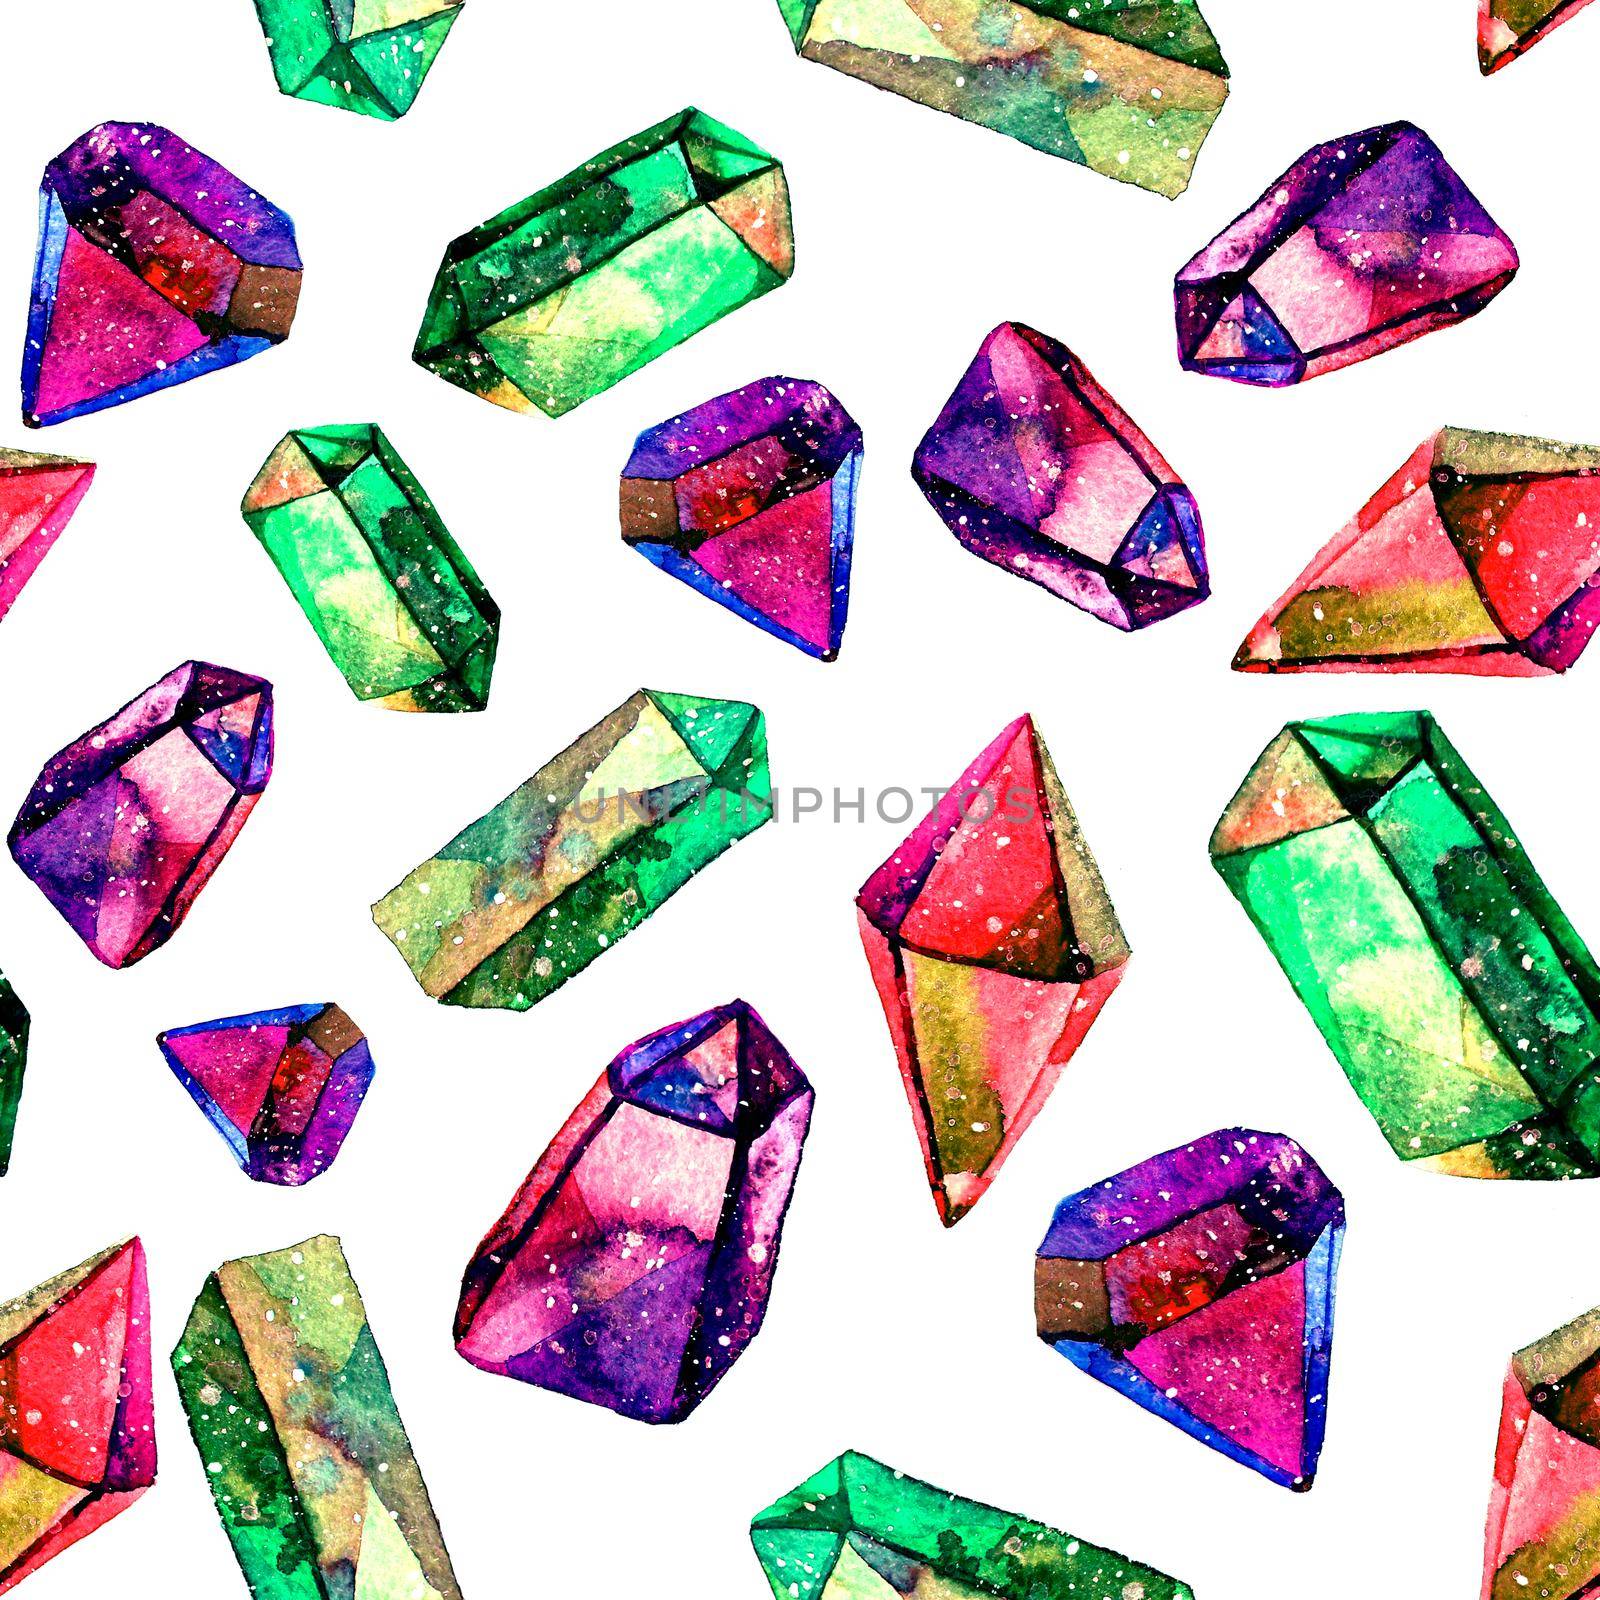 Watercolor illustration of diamond crystals - seamless pattern. Print for textile, fabric, wallpaper. Hand made painting. Jewel on white background. Unusual modern ornate design. by DesignAB